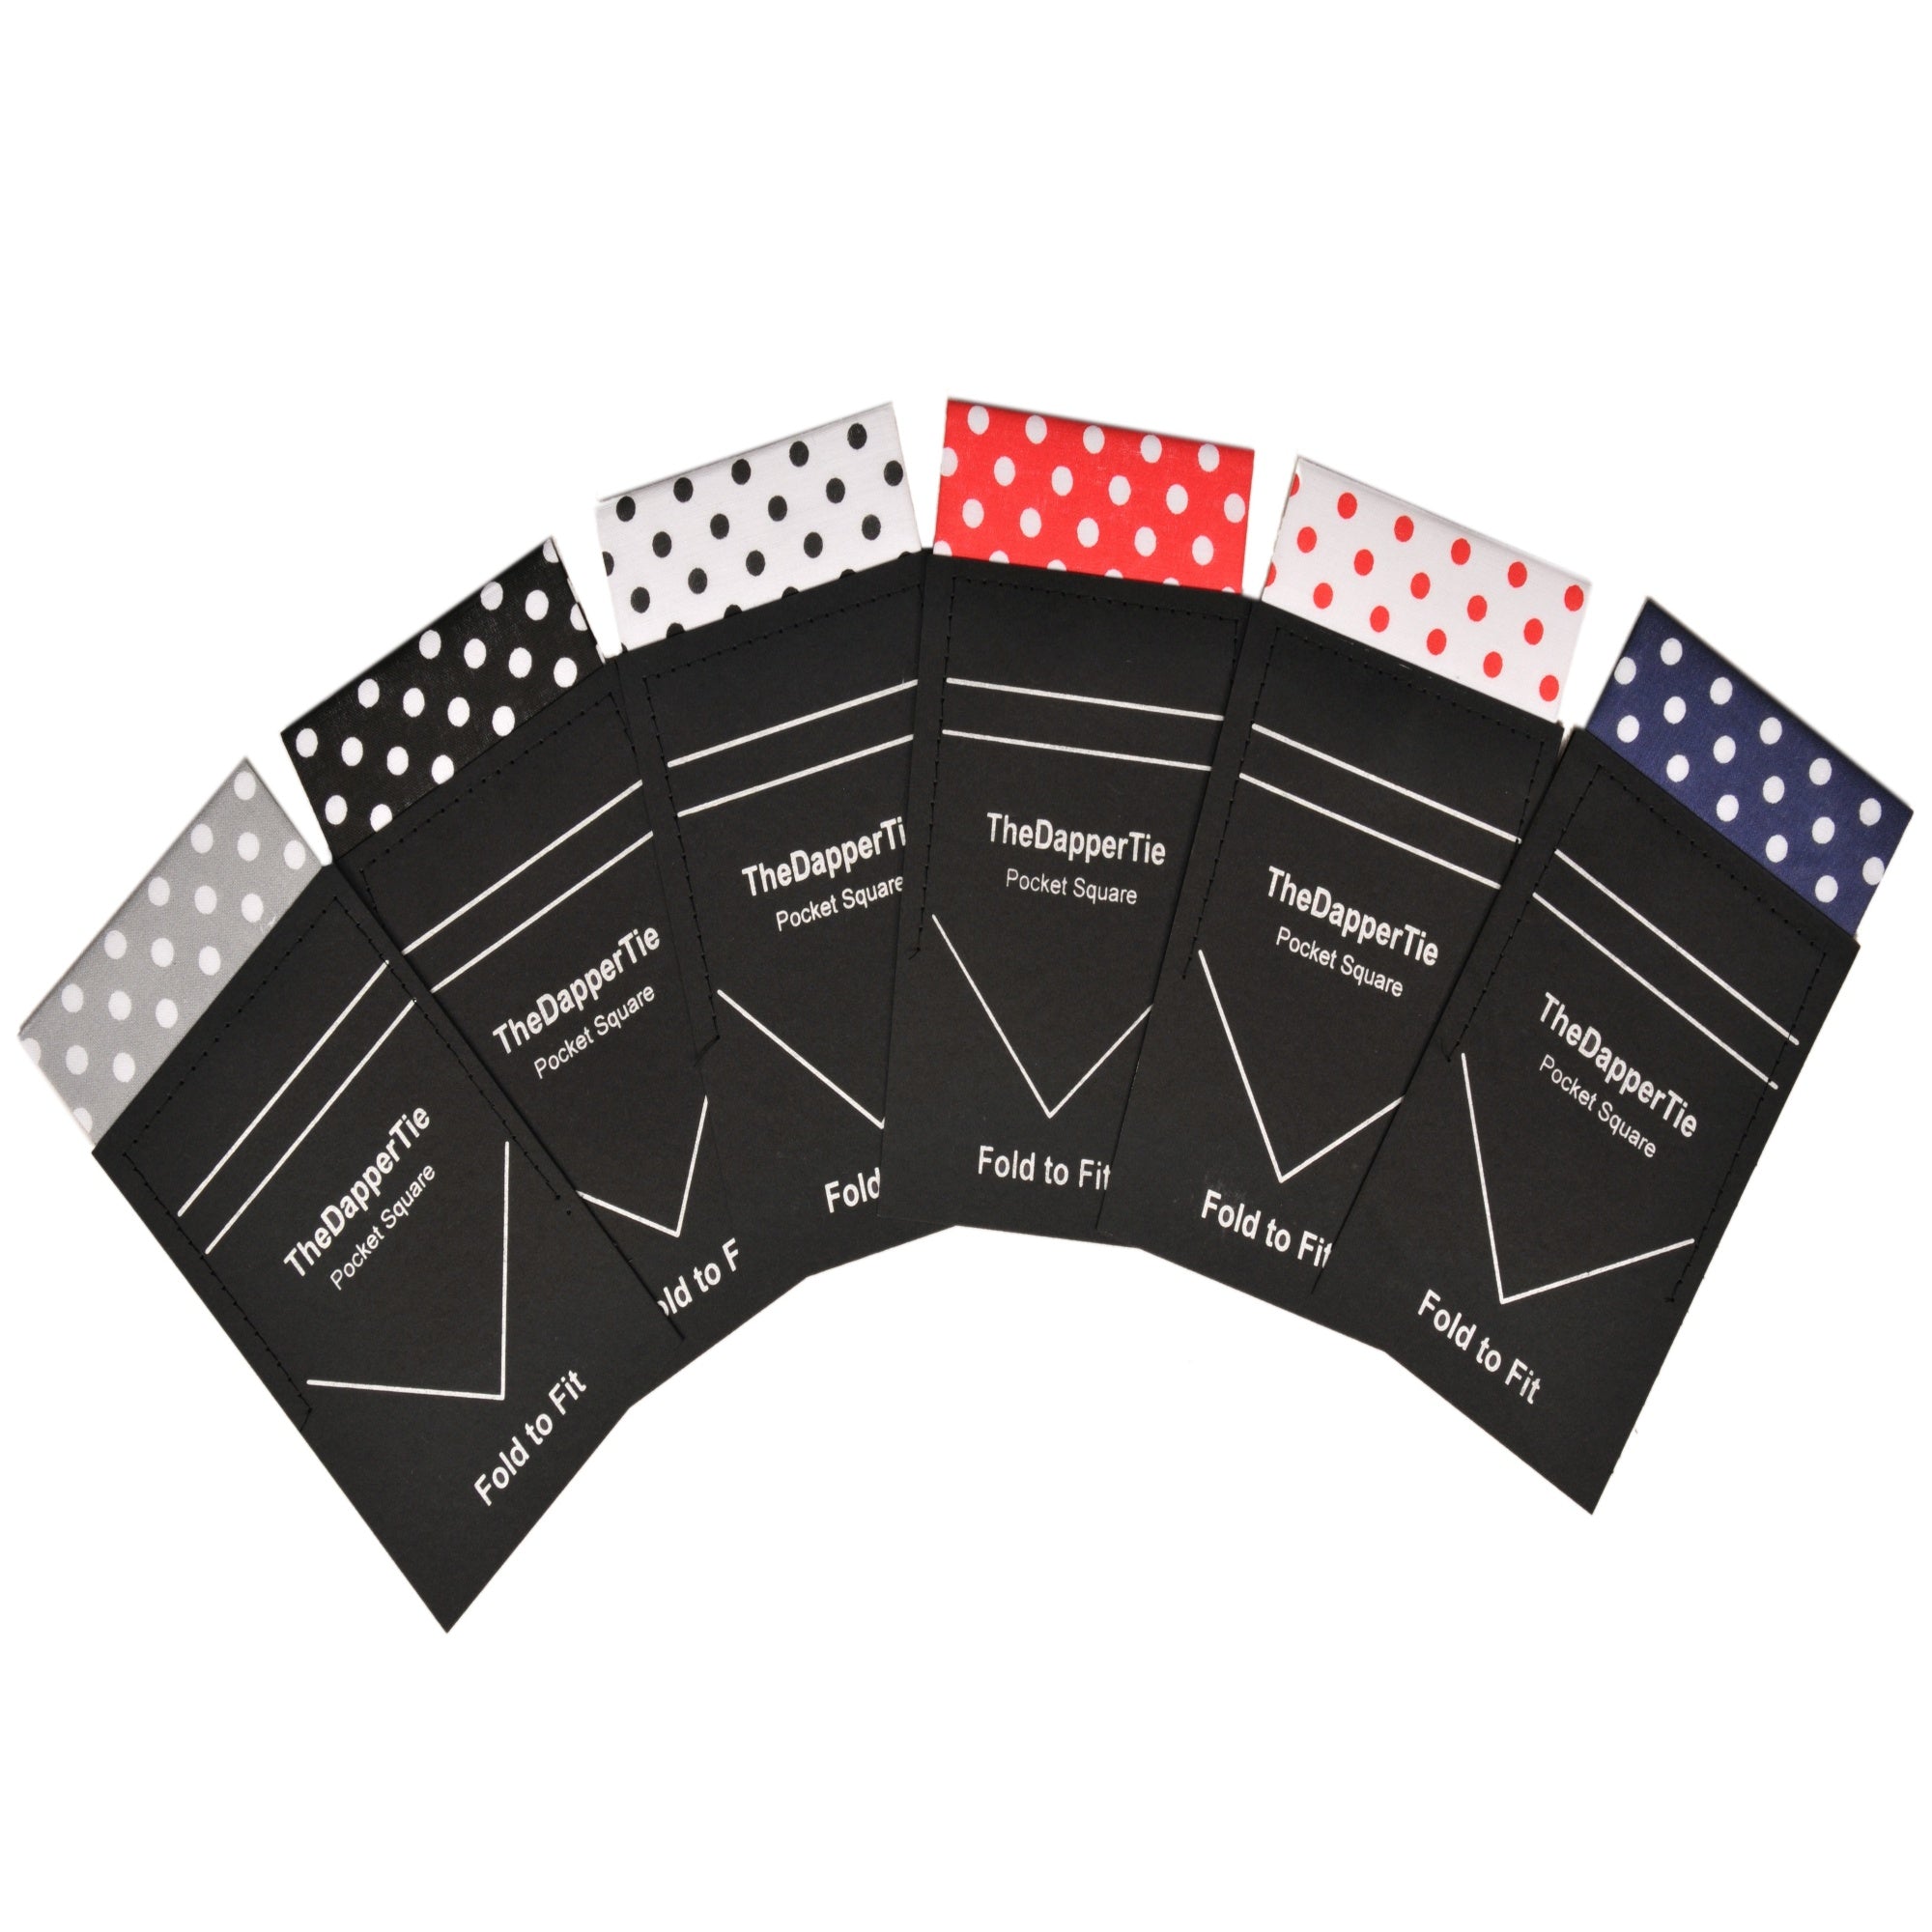 New Men's Polka Dots Flat Pre Folded Pocket Square on Card - TheDapperTie Prefolded Pocket Squares TheDapperTie   